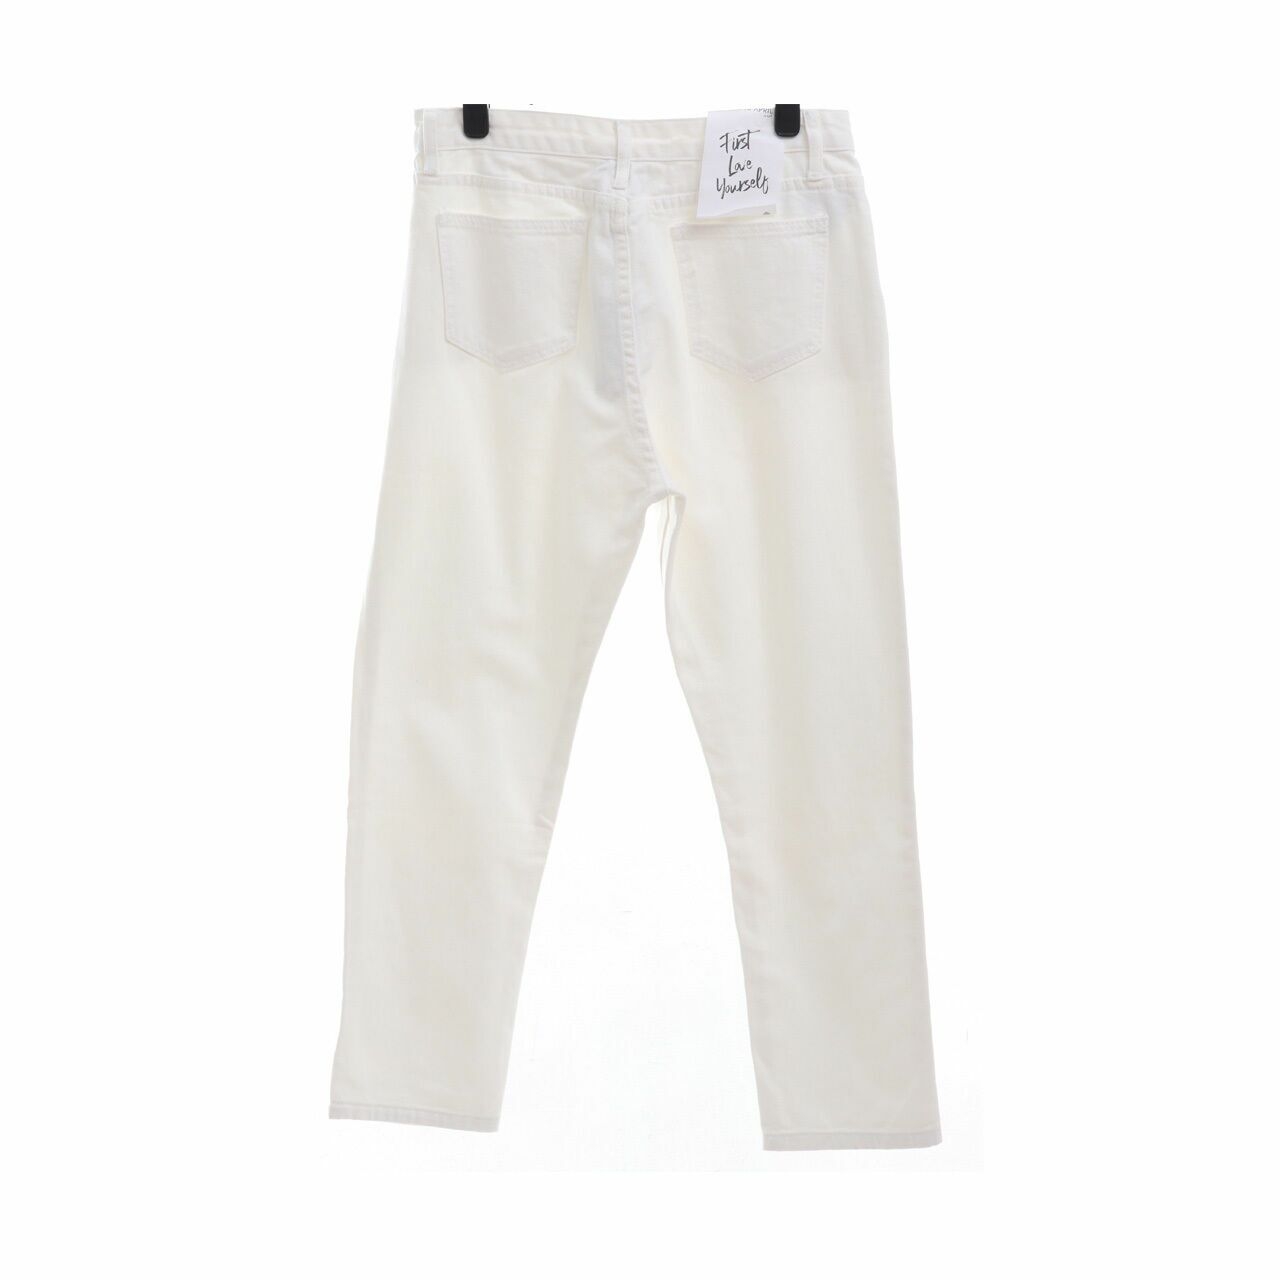 This is April White Long Pants 